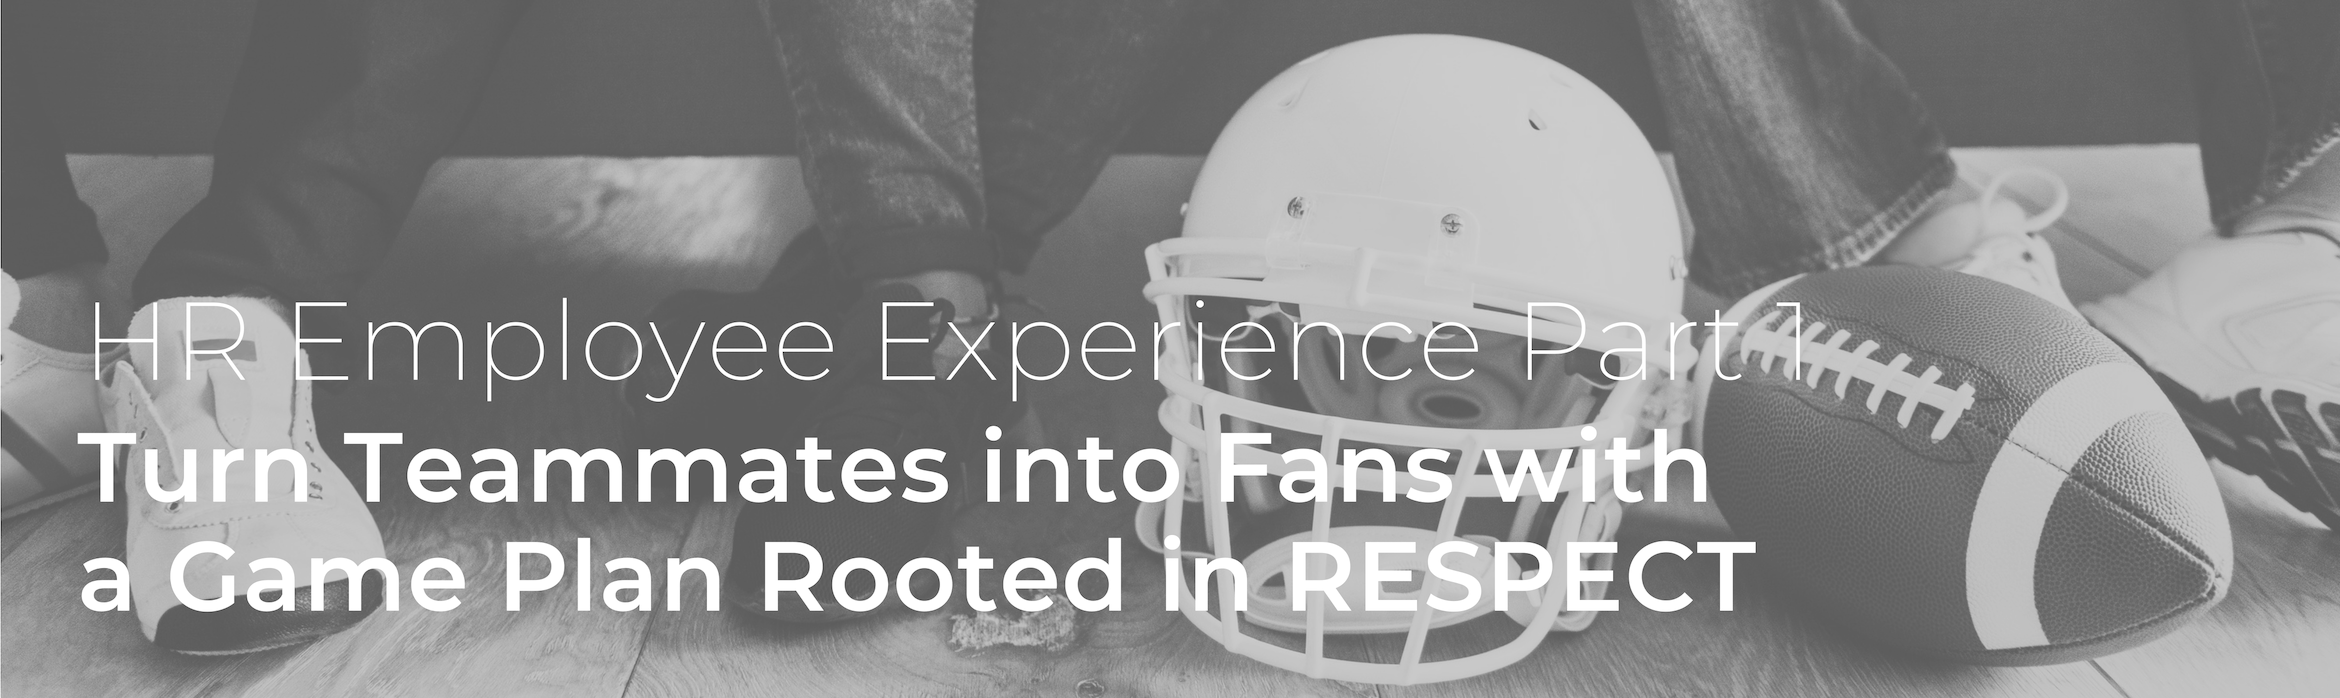 Turn Teammates into Fans with a Game Plan Rooted in RESPECT